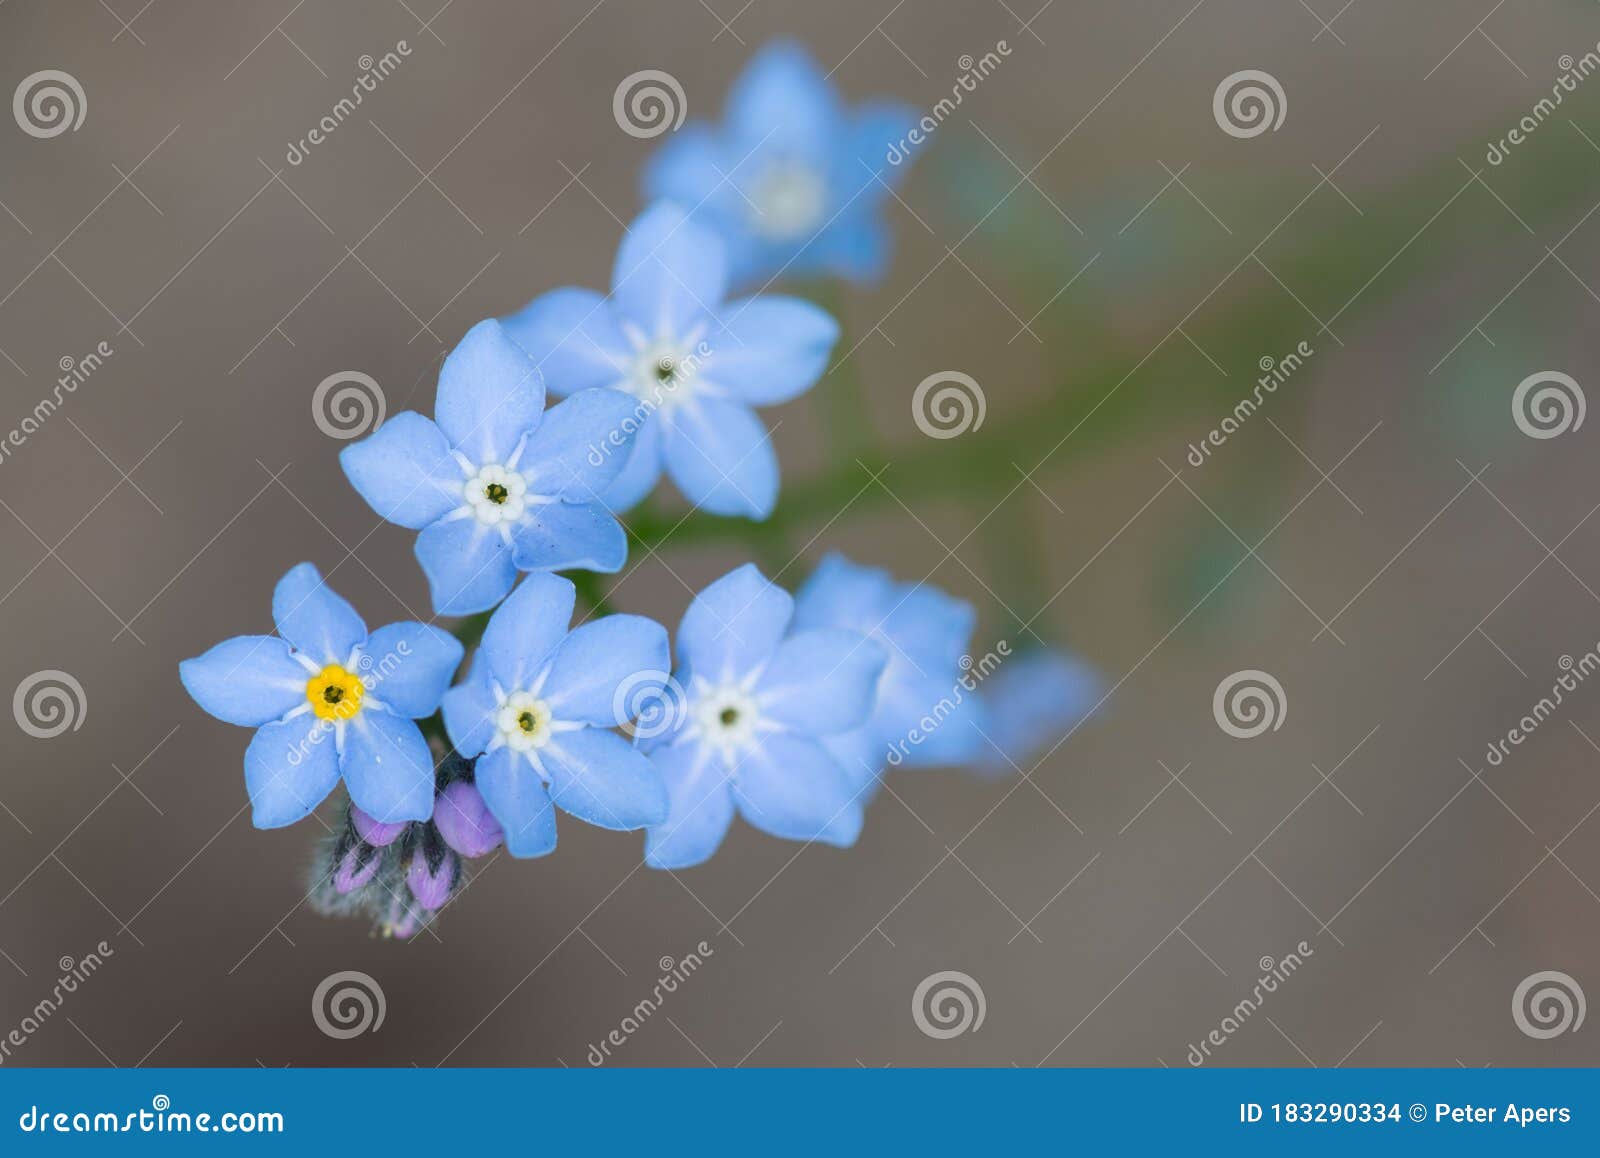 forget-me-not, myosotis, blue flowers and buds